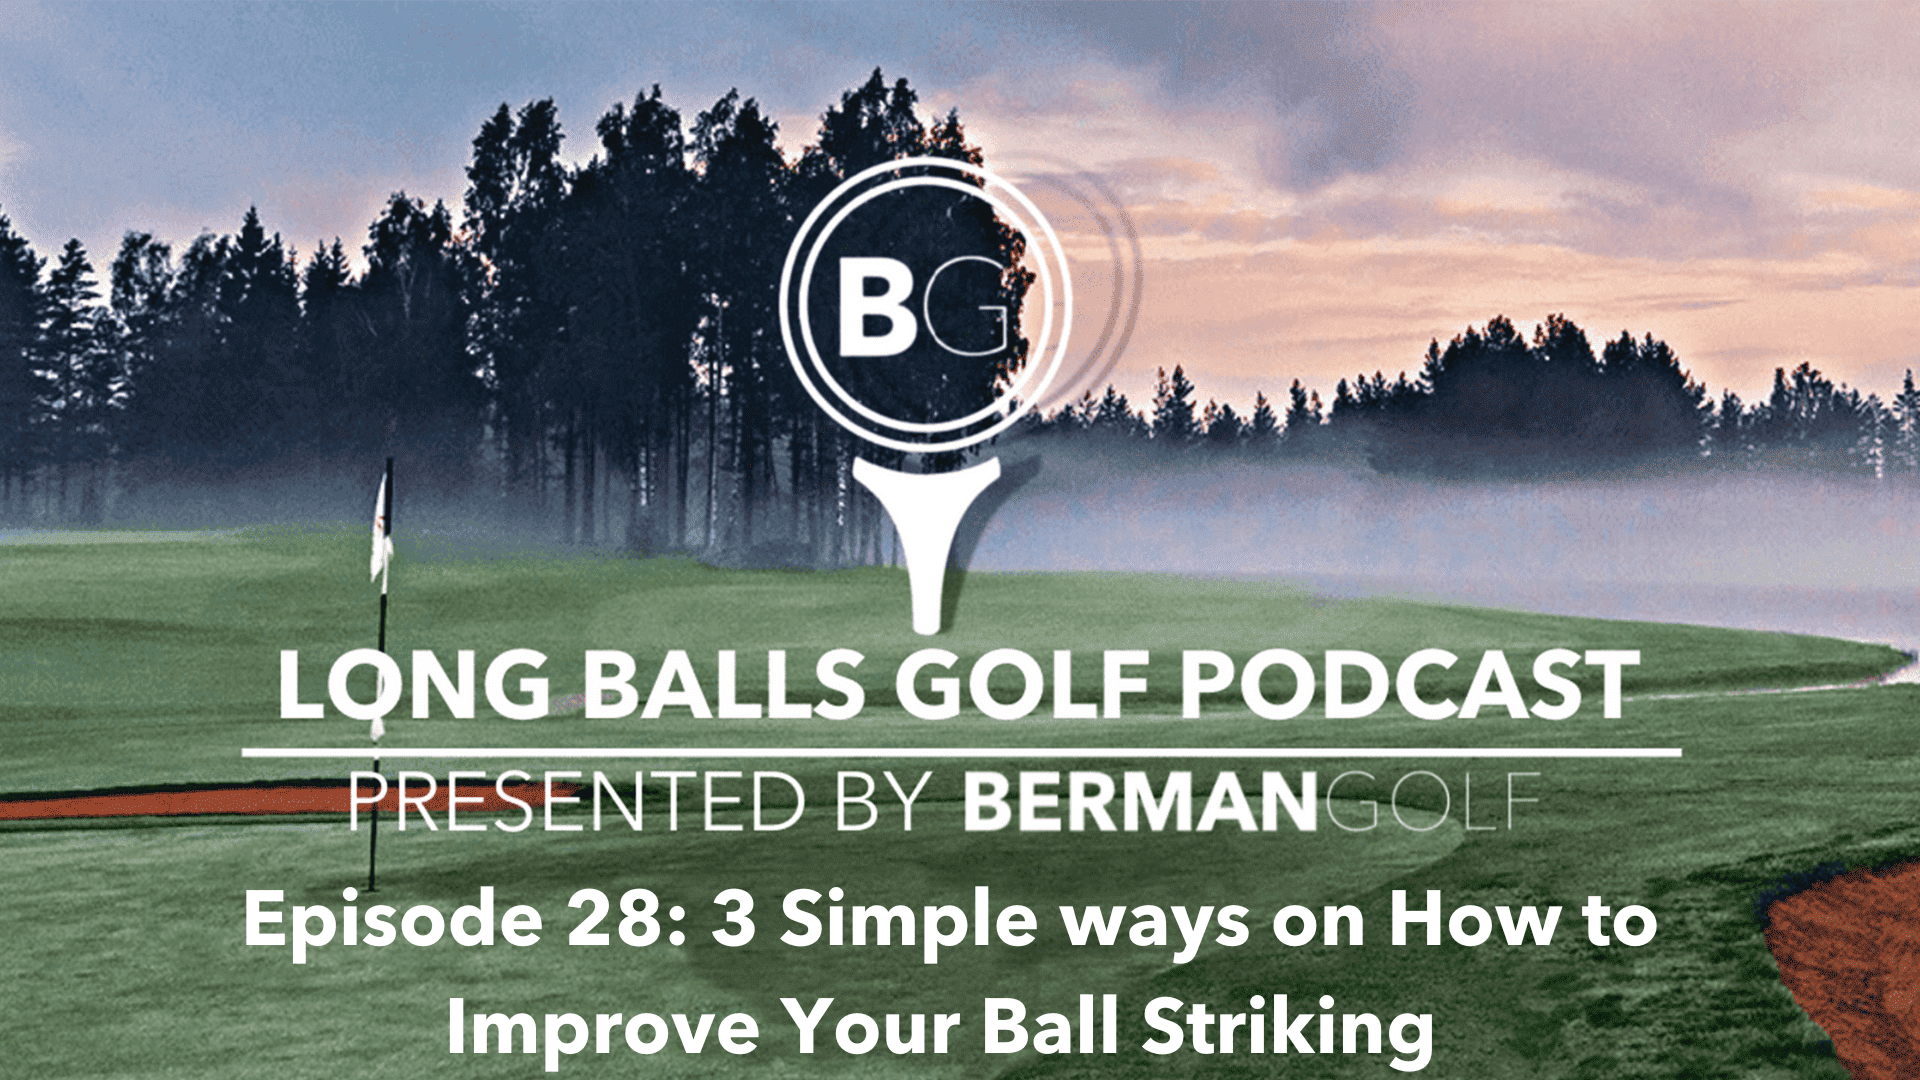 Episode 28: 3 Simple Ways on How to Improve Your Ball Striking